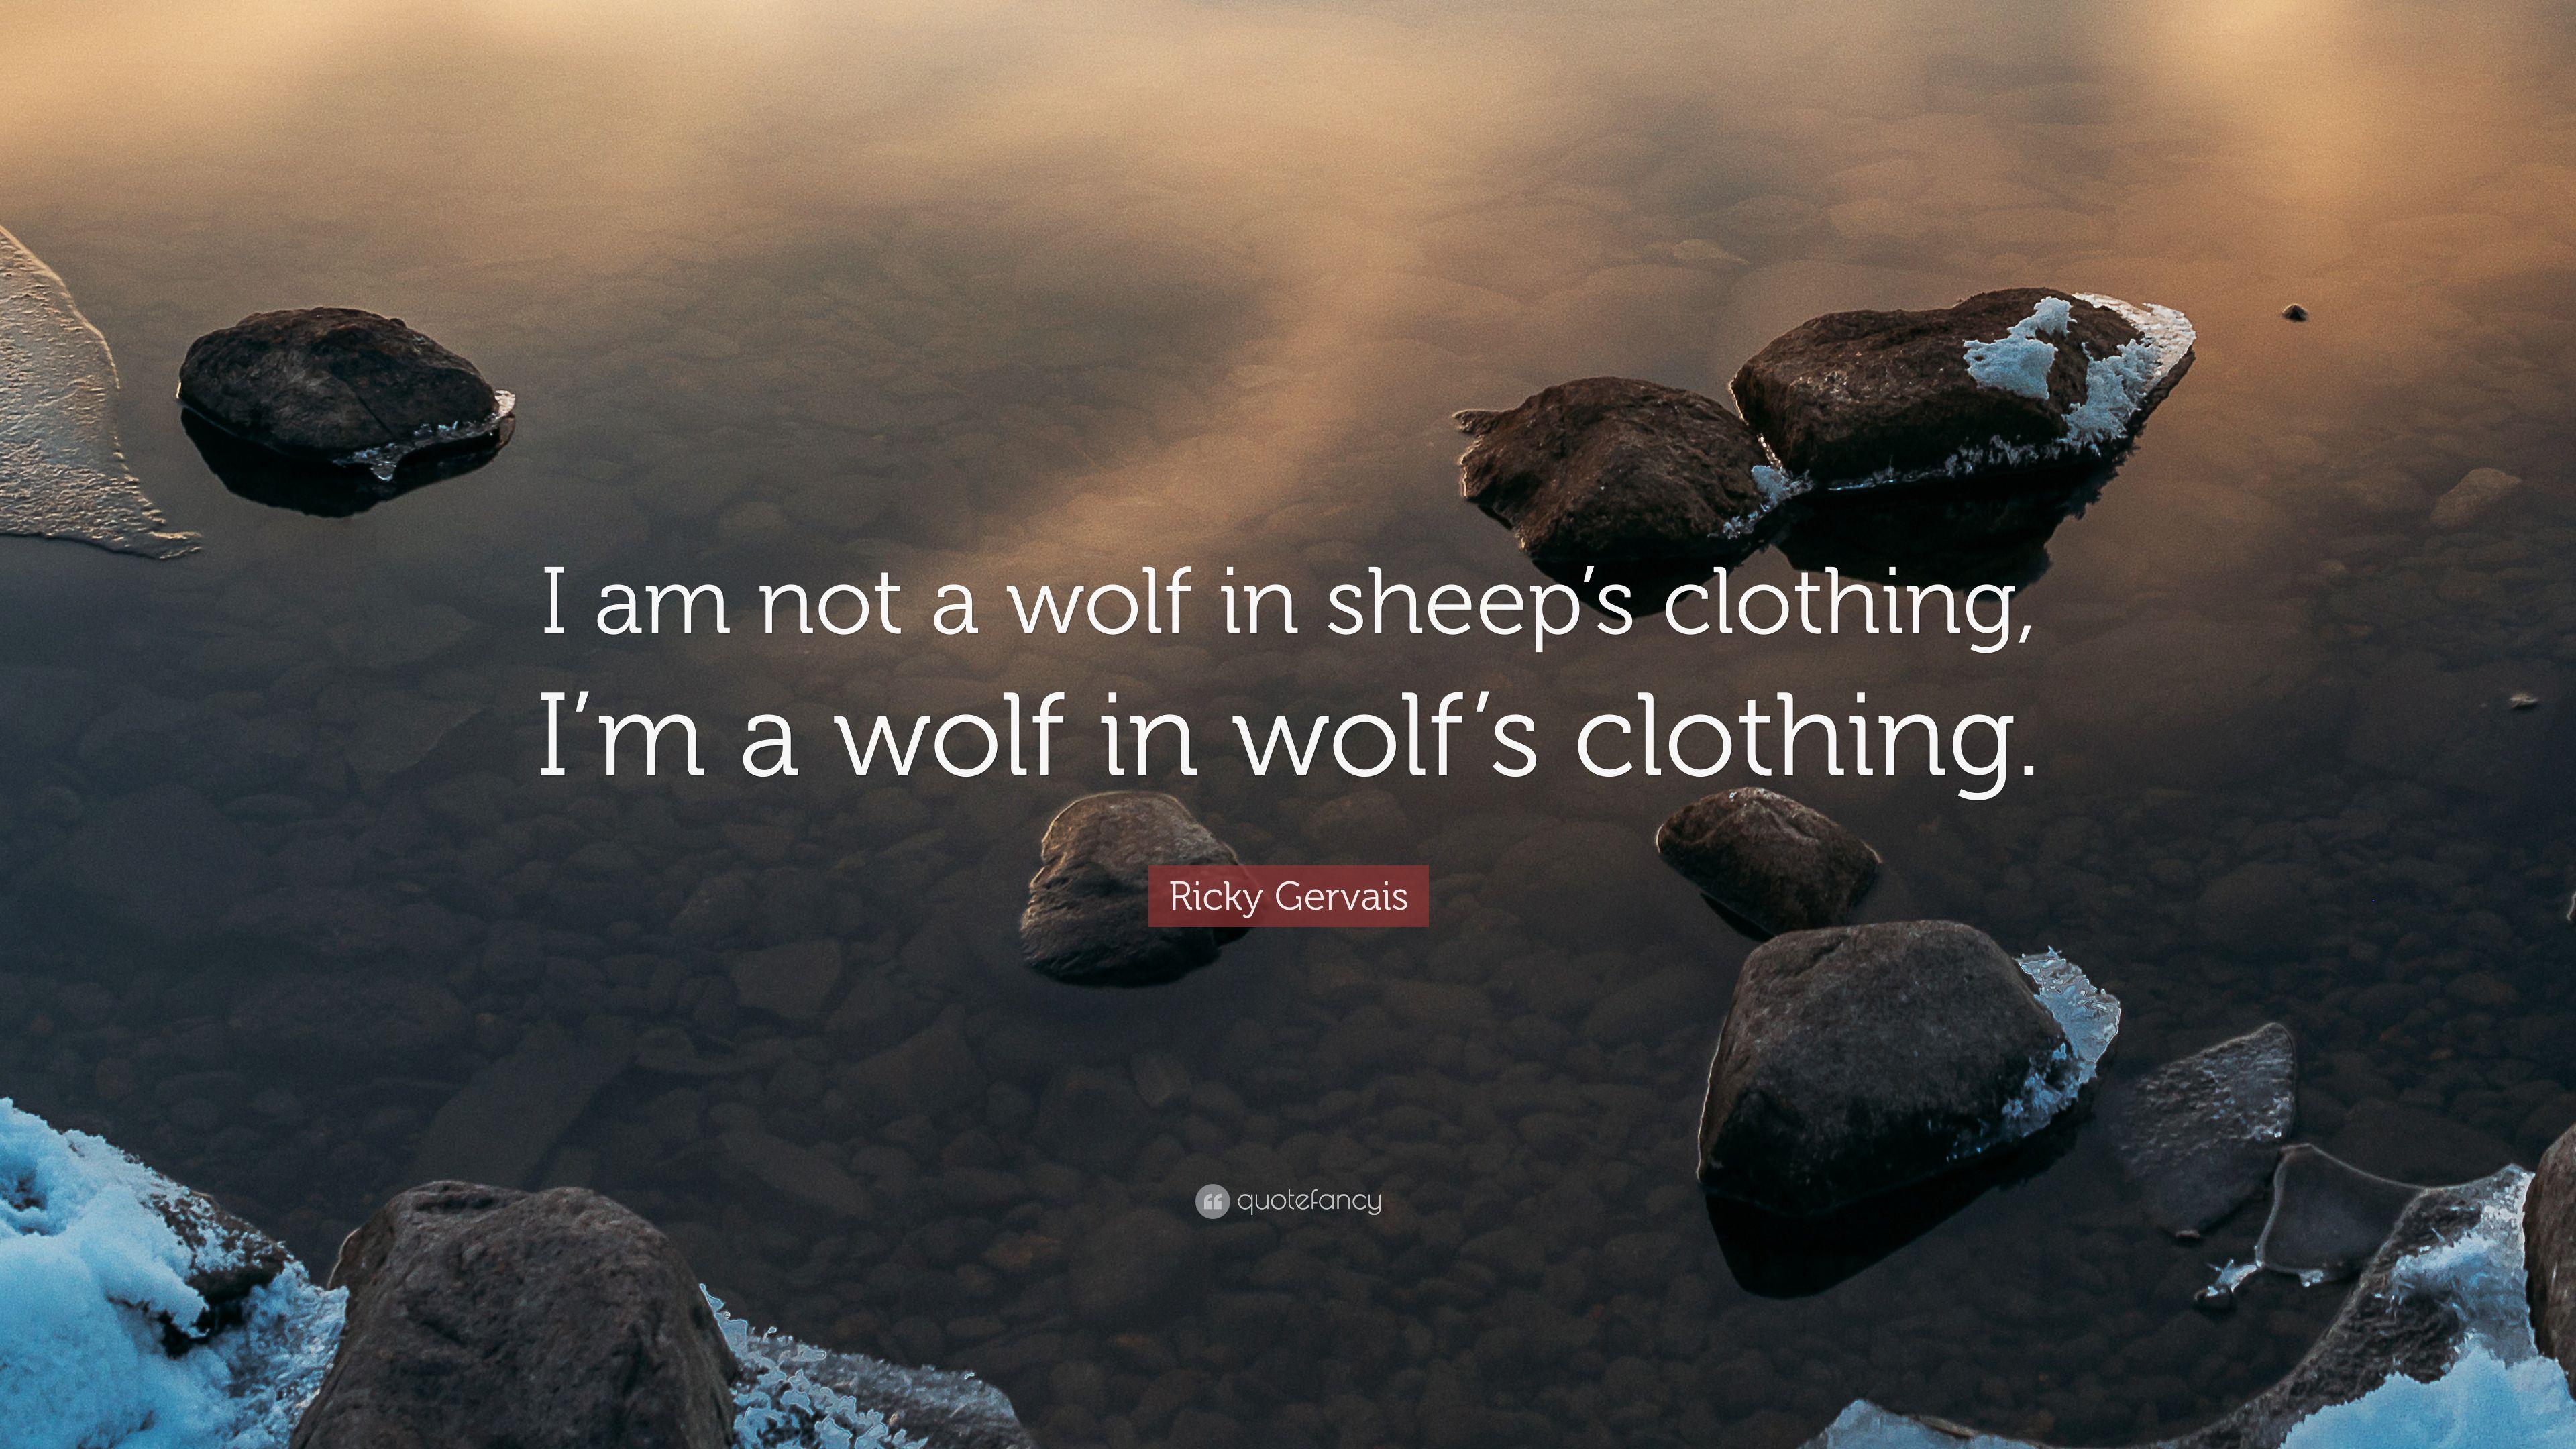 Ricky Gervais Quote: “I am not a wolf in sheep's clothing, I'm a